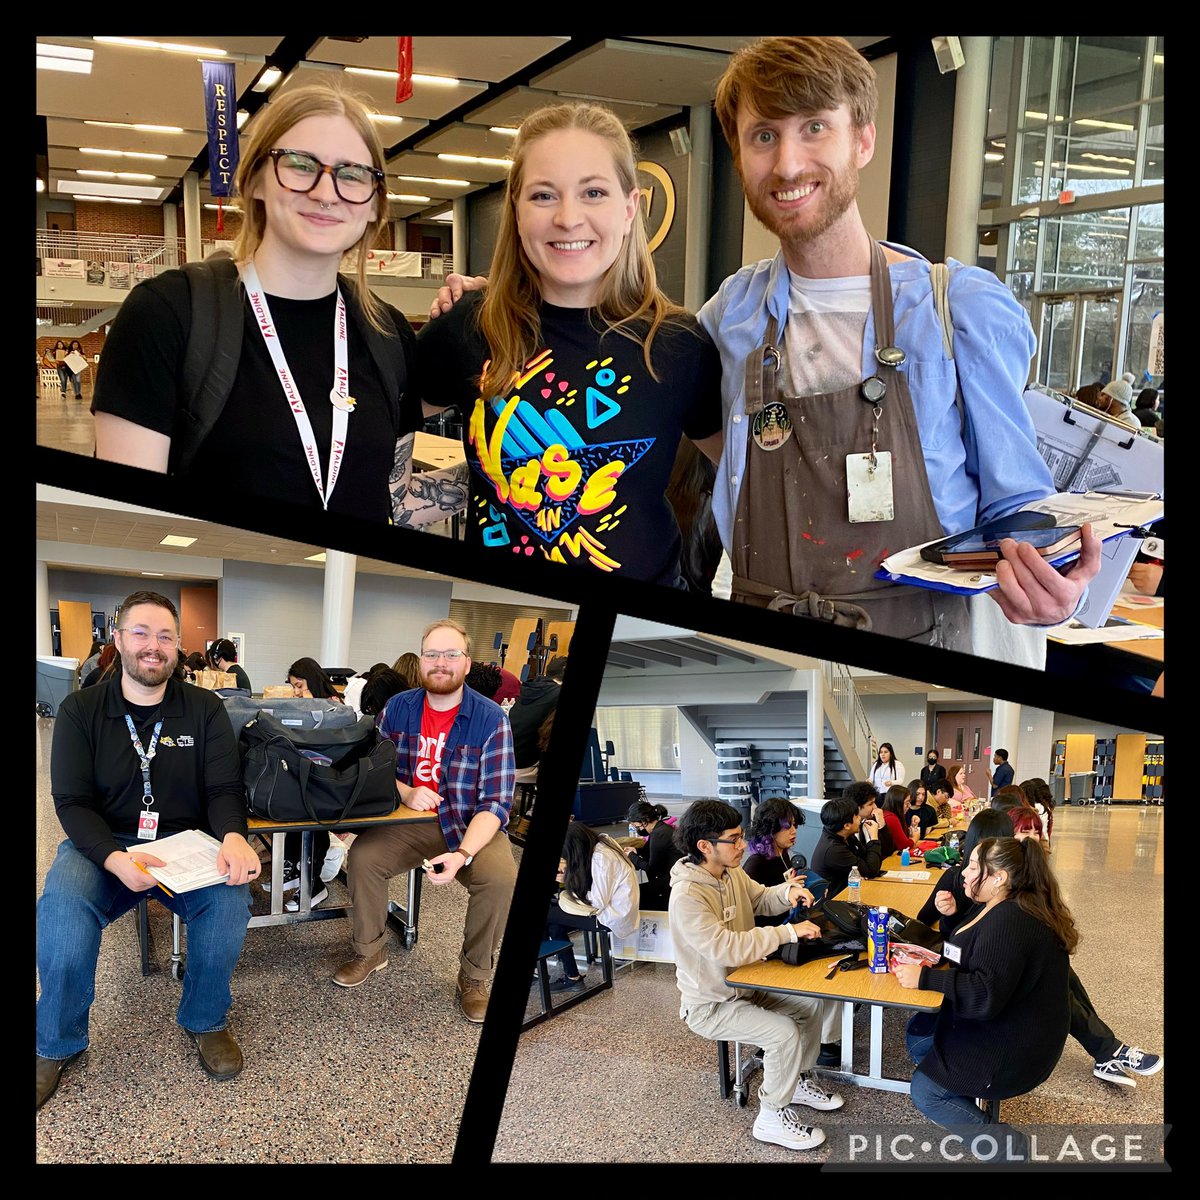 Great morning supporting @AldineArt students at the Region 4 VASE Competition! Congrats to ALL participants! @NewmanKaileigh @Ms_Herrera_Art #AmplifyAldineArt